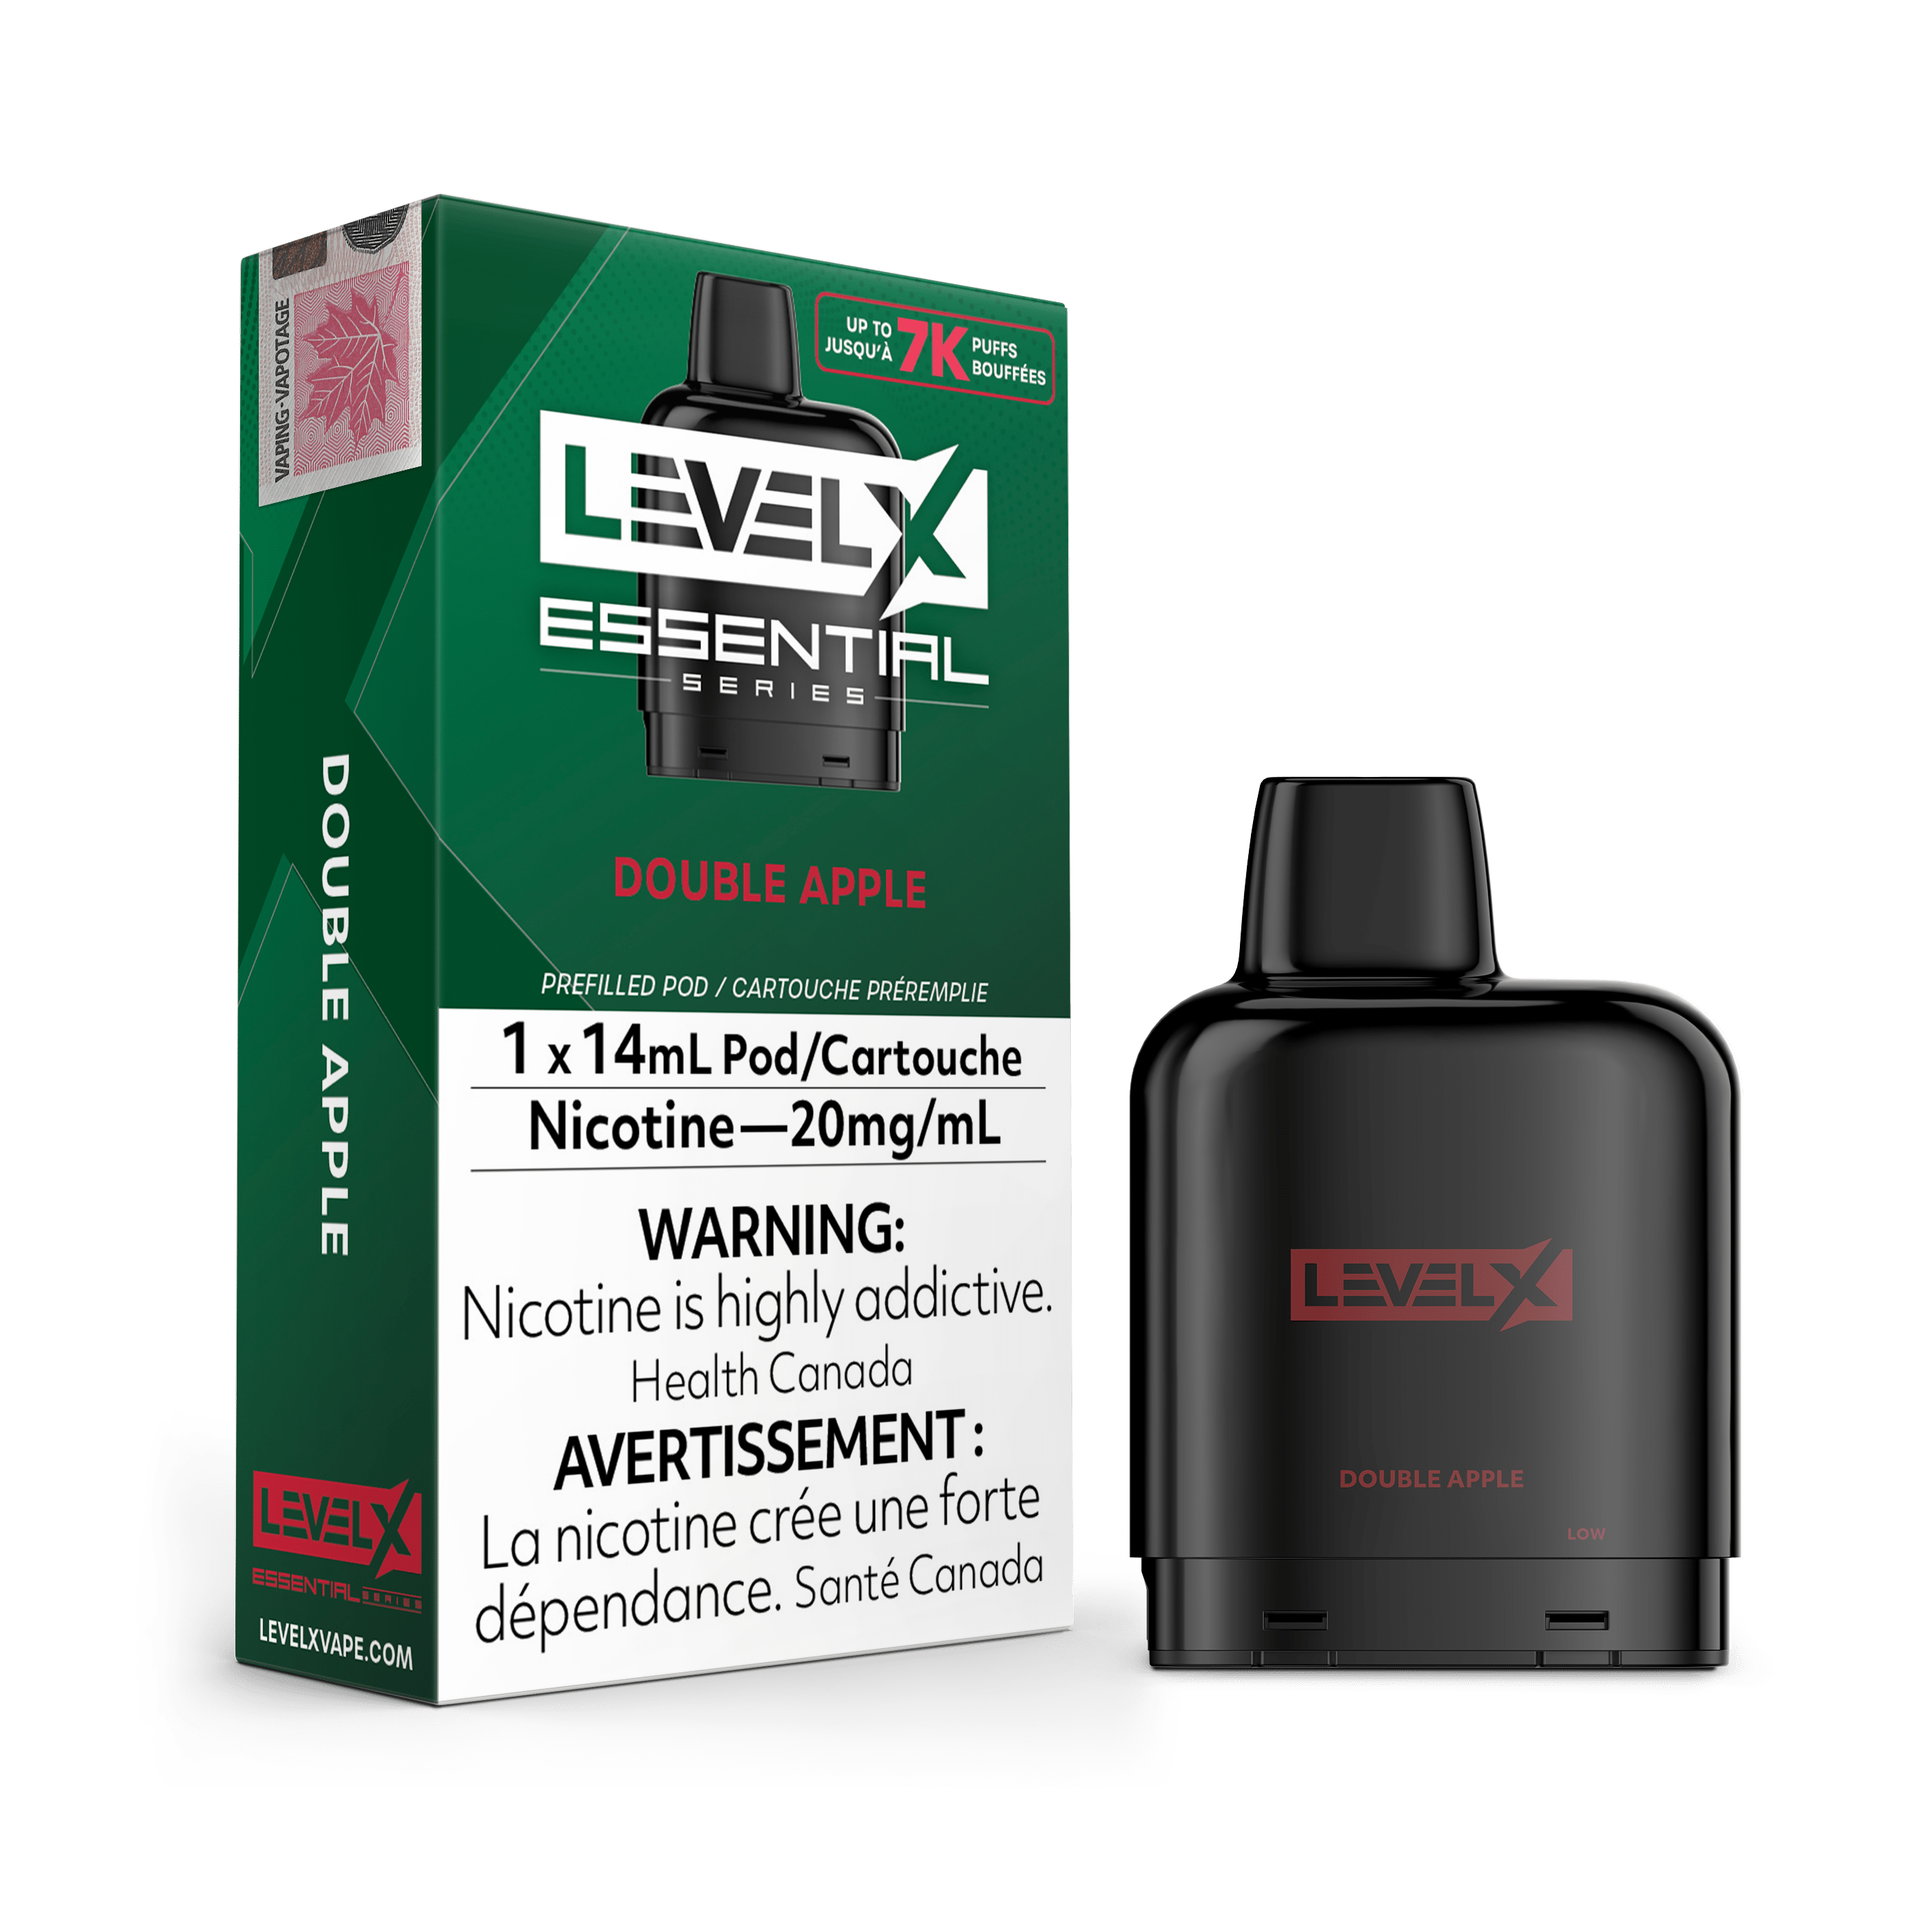 Level X Essential Series Pod - Double Apple available on Canada online vape shop